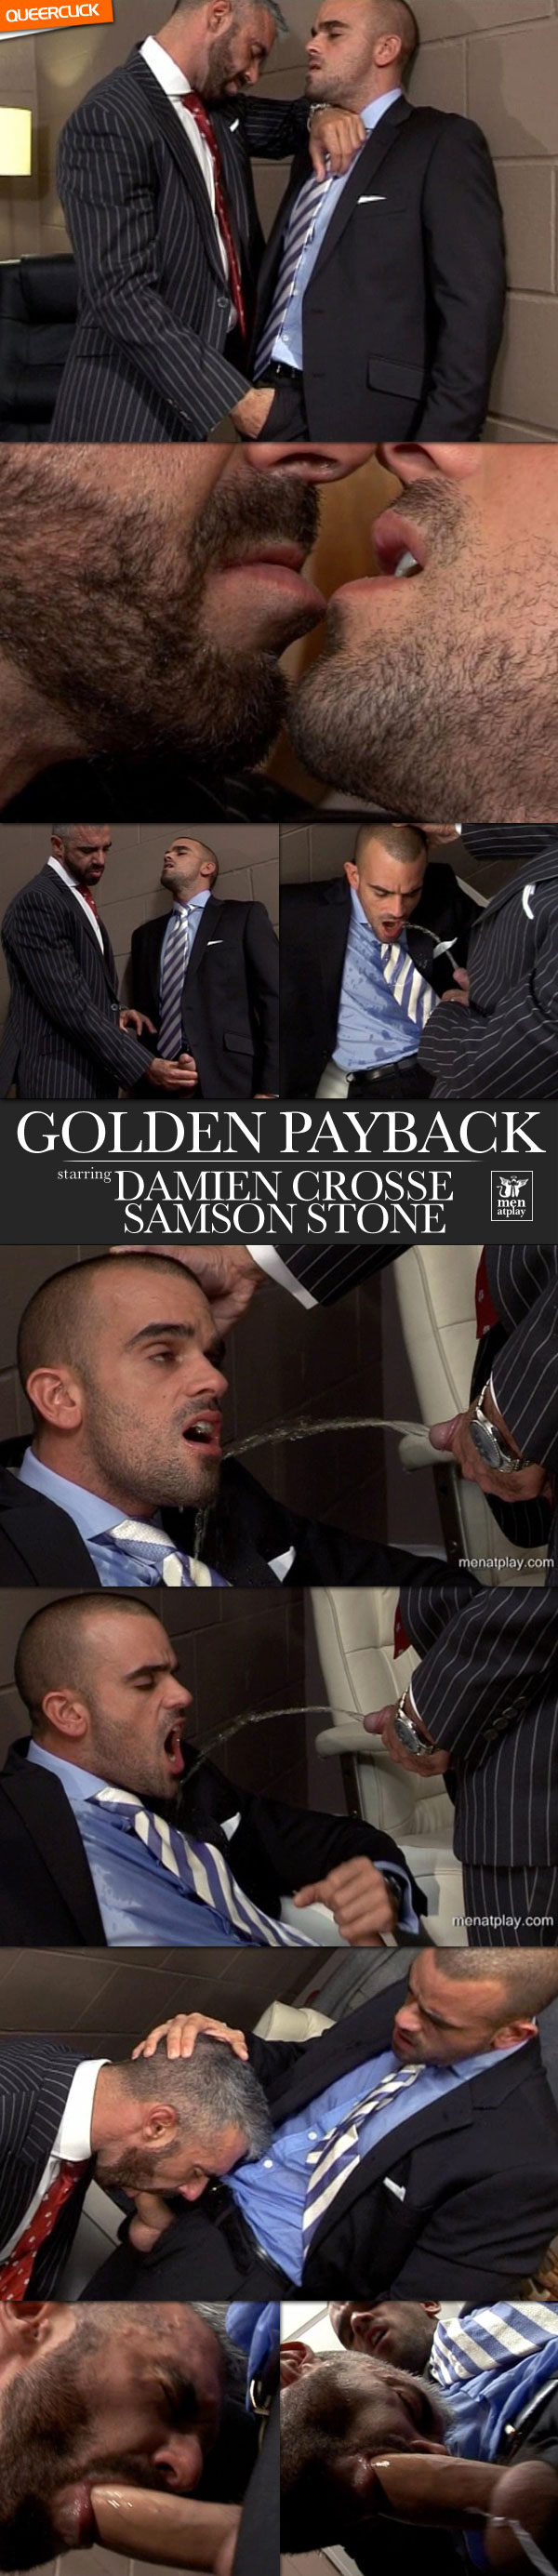 Men At Play: Golden Payback - Damien Crosse and Samson Stone